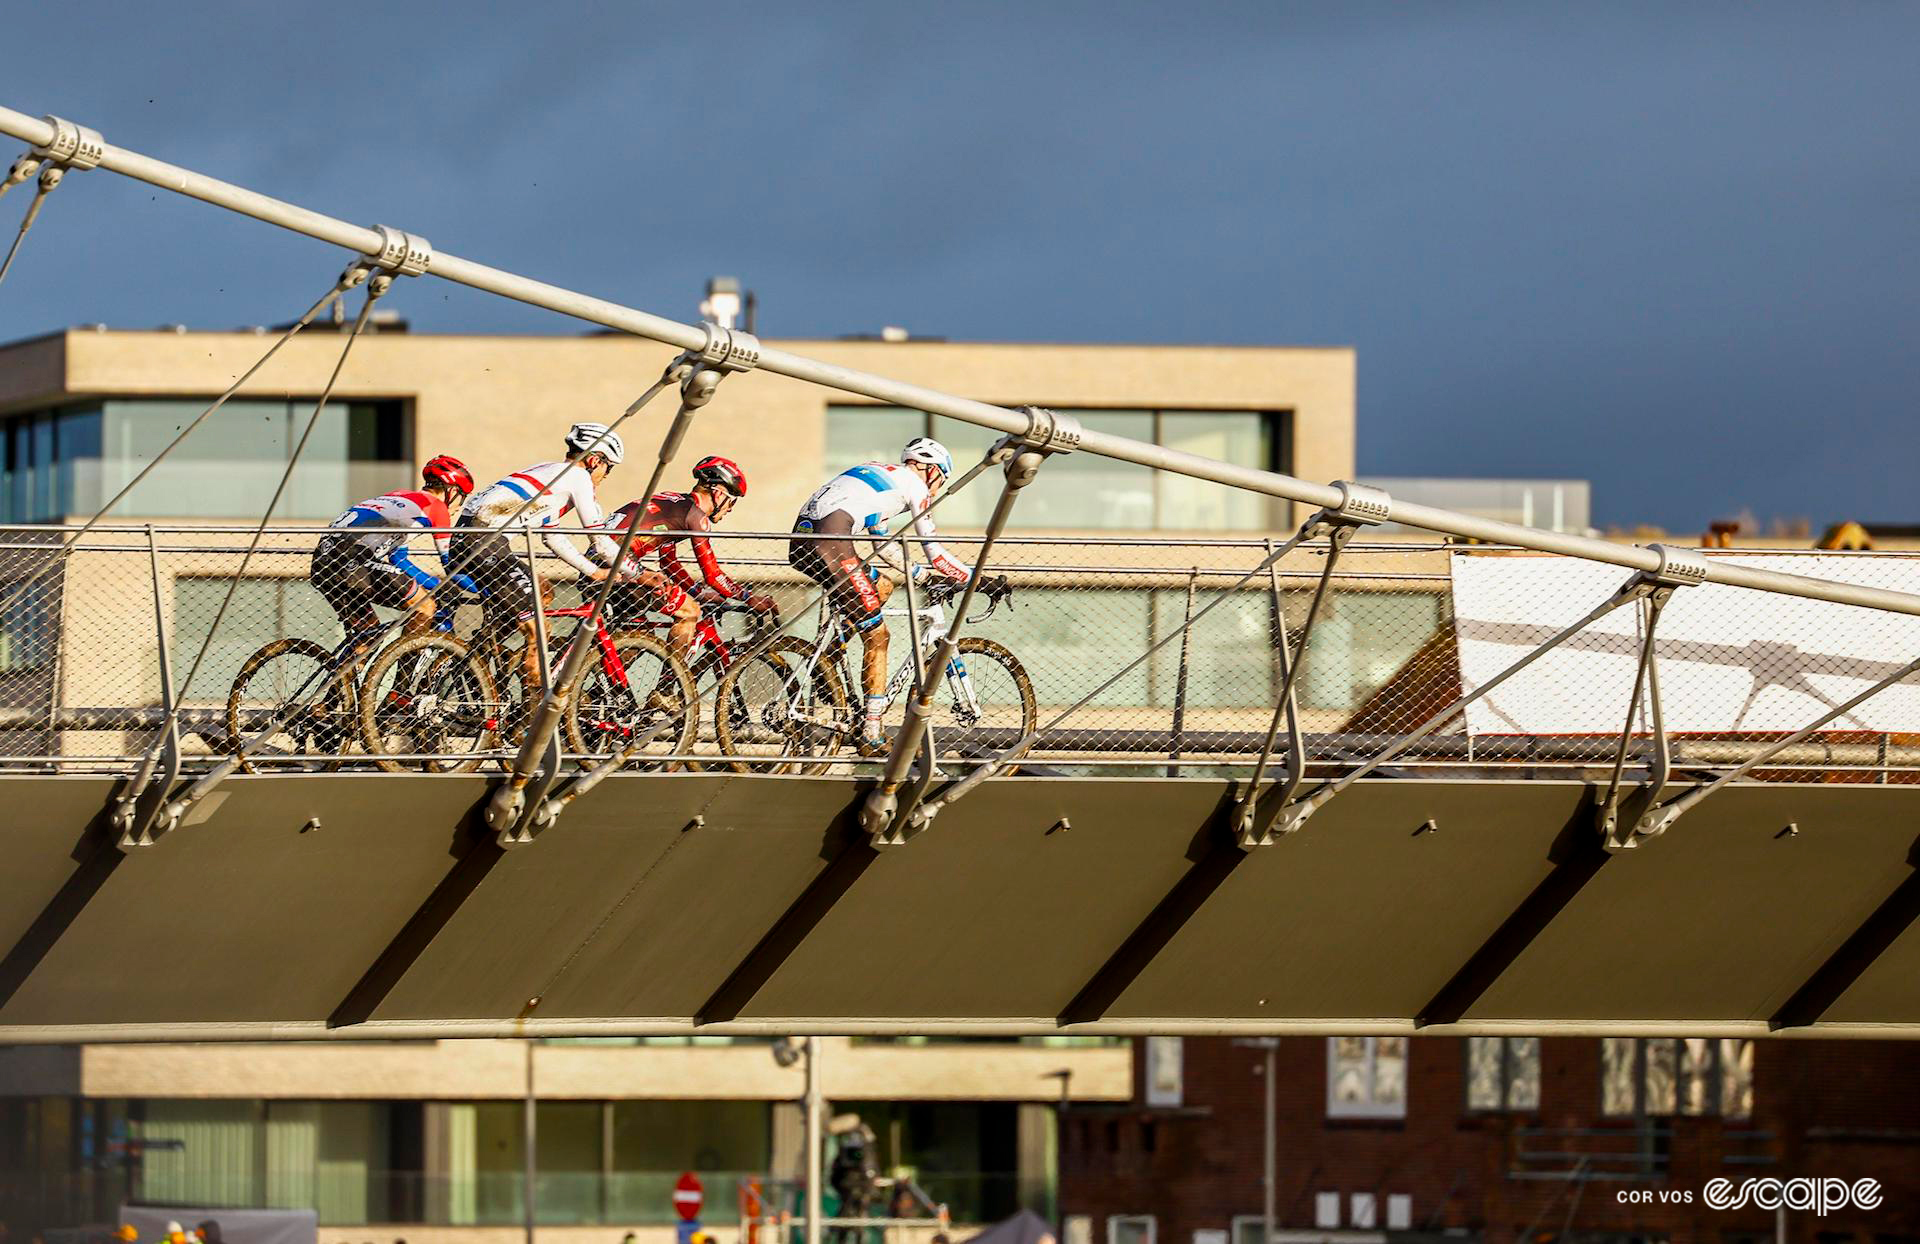 The four leaders of the men's cyclocross X20 Trofee Kortrijk ride a flyover as a group, lit up late in the day against a gloomy backdrop.